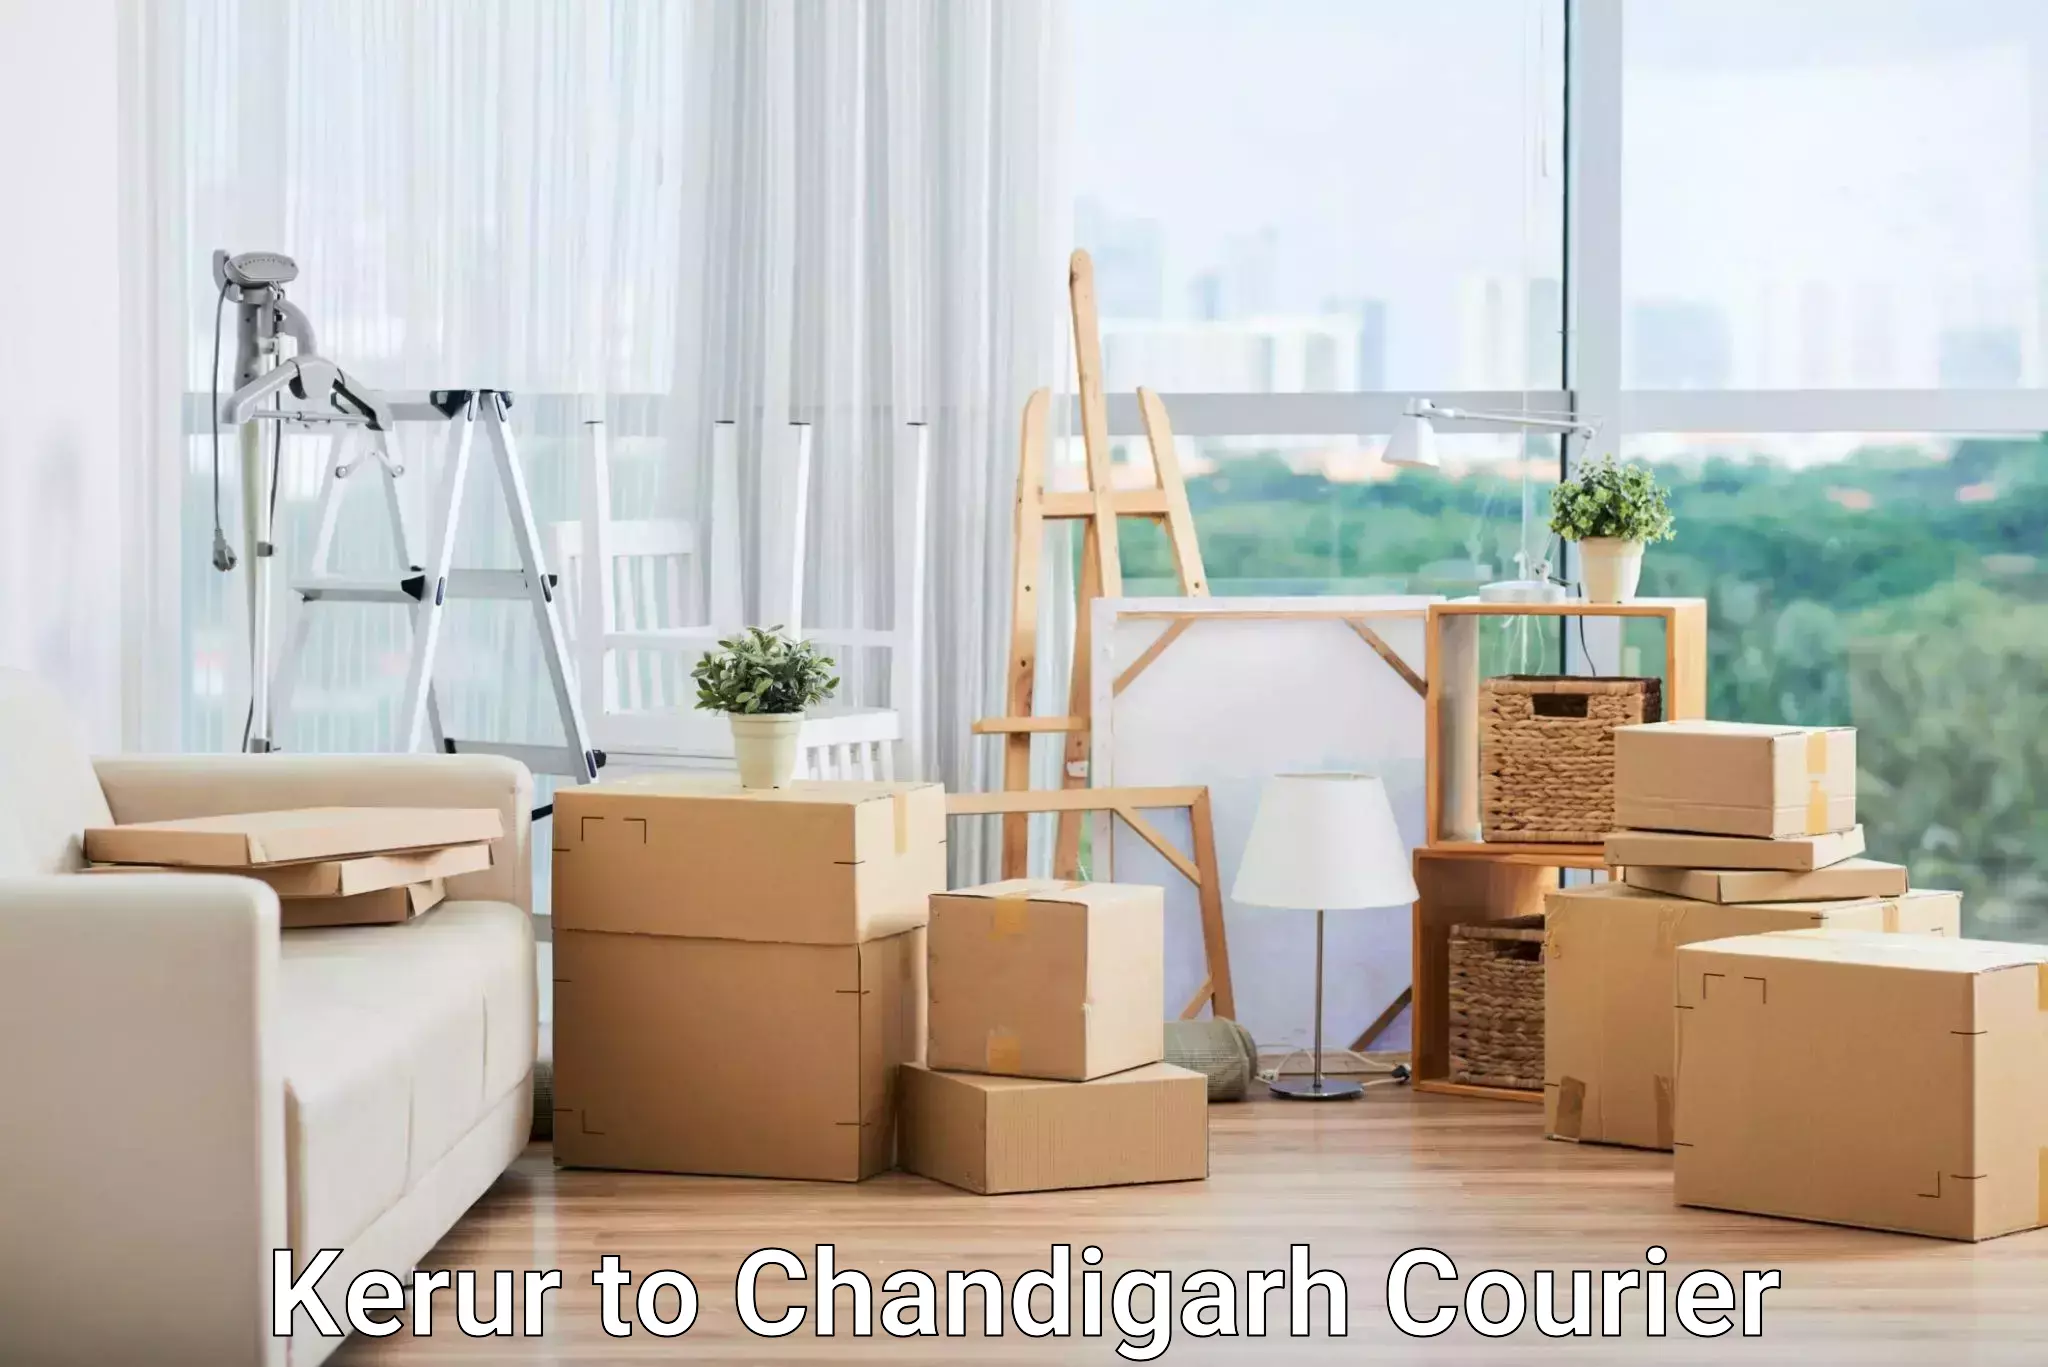 End-to-end delivery in Kerur to Chandigarh